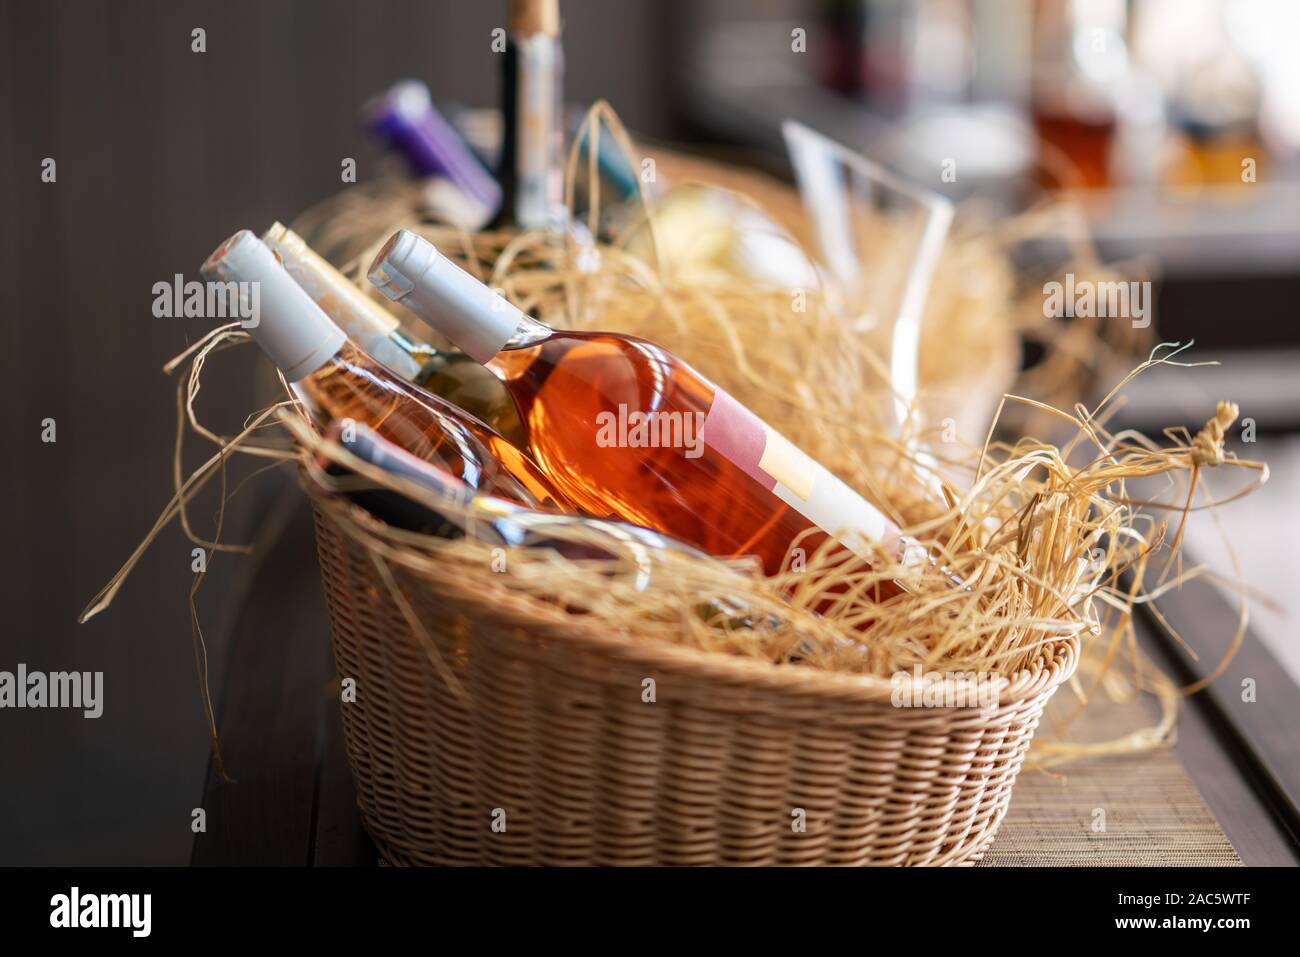 scrumptious wine bottles standing horizontally in a picnic basket. Stock Photo